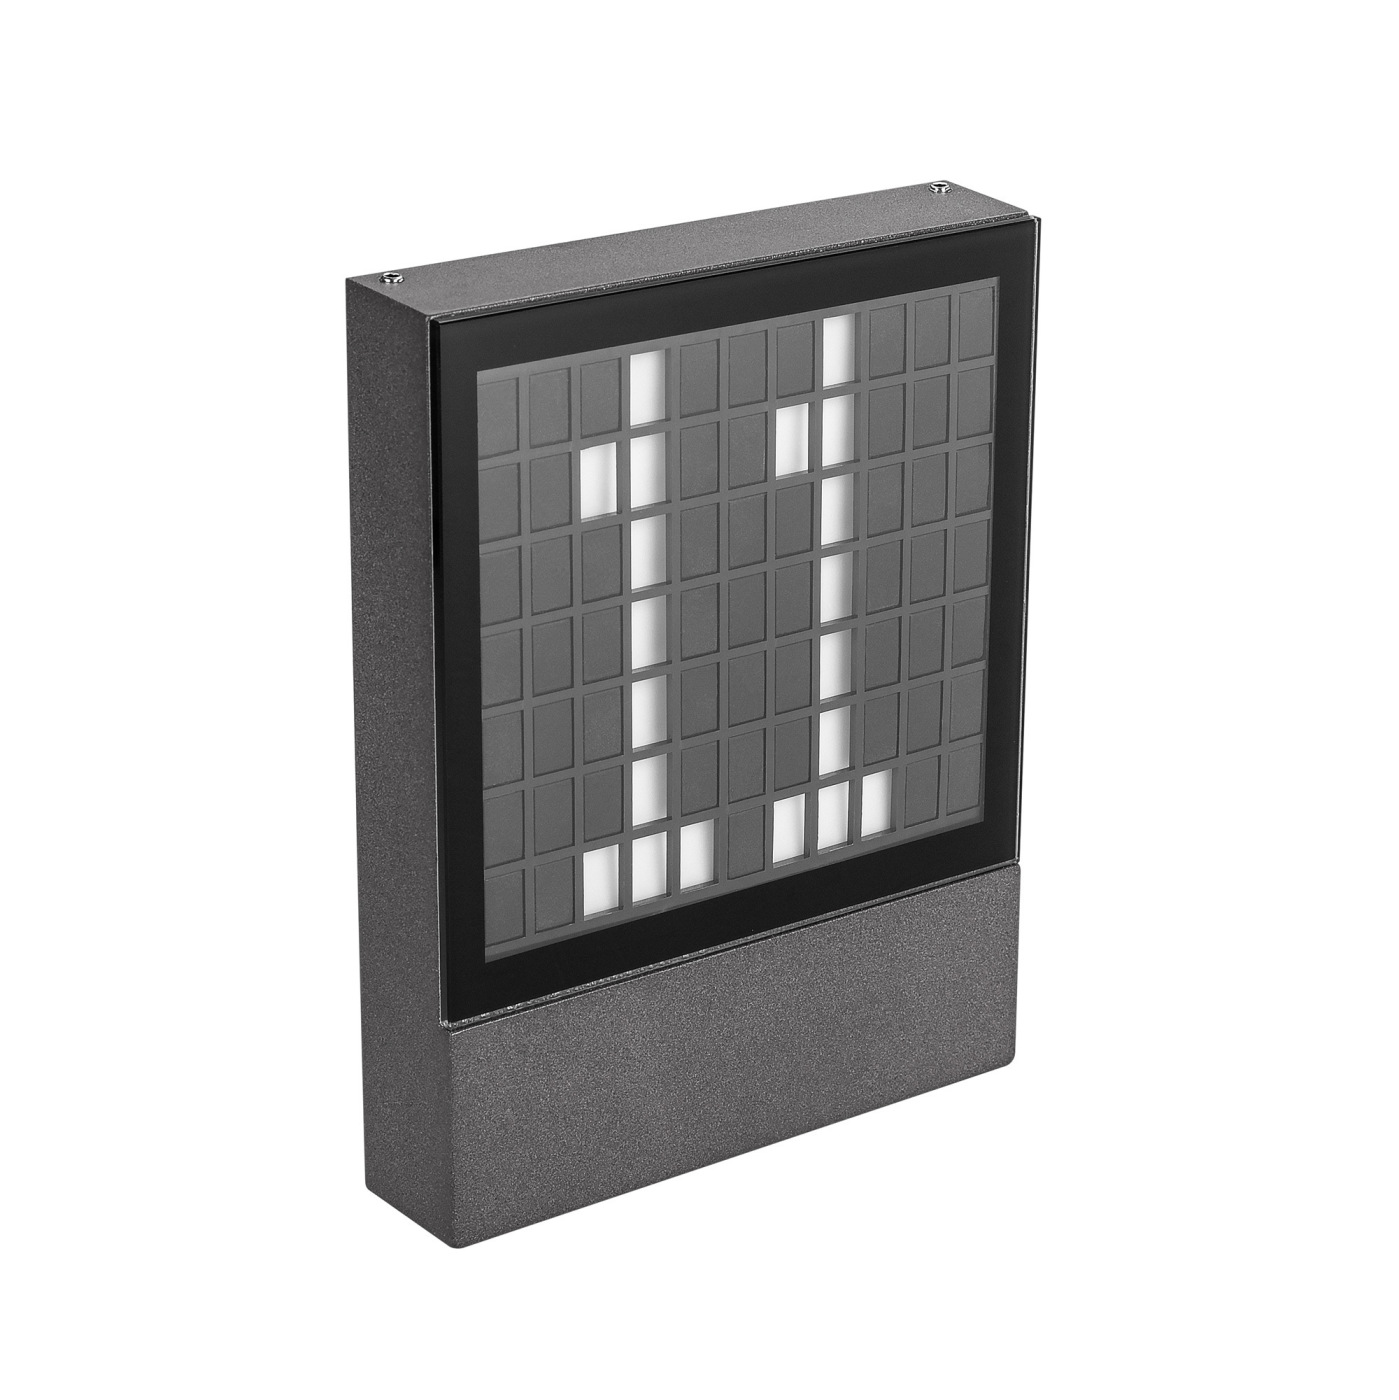 Светильник LGD-SIGN-WALL-S150x200-3W Warm3000 (GR, 148 deg, 230V) (Arlight, IP54 Металл, 3 года) a4 pvc magnetic office indoor wall mount sign holder display info poster door sign for business advertisements